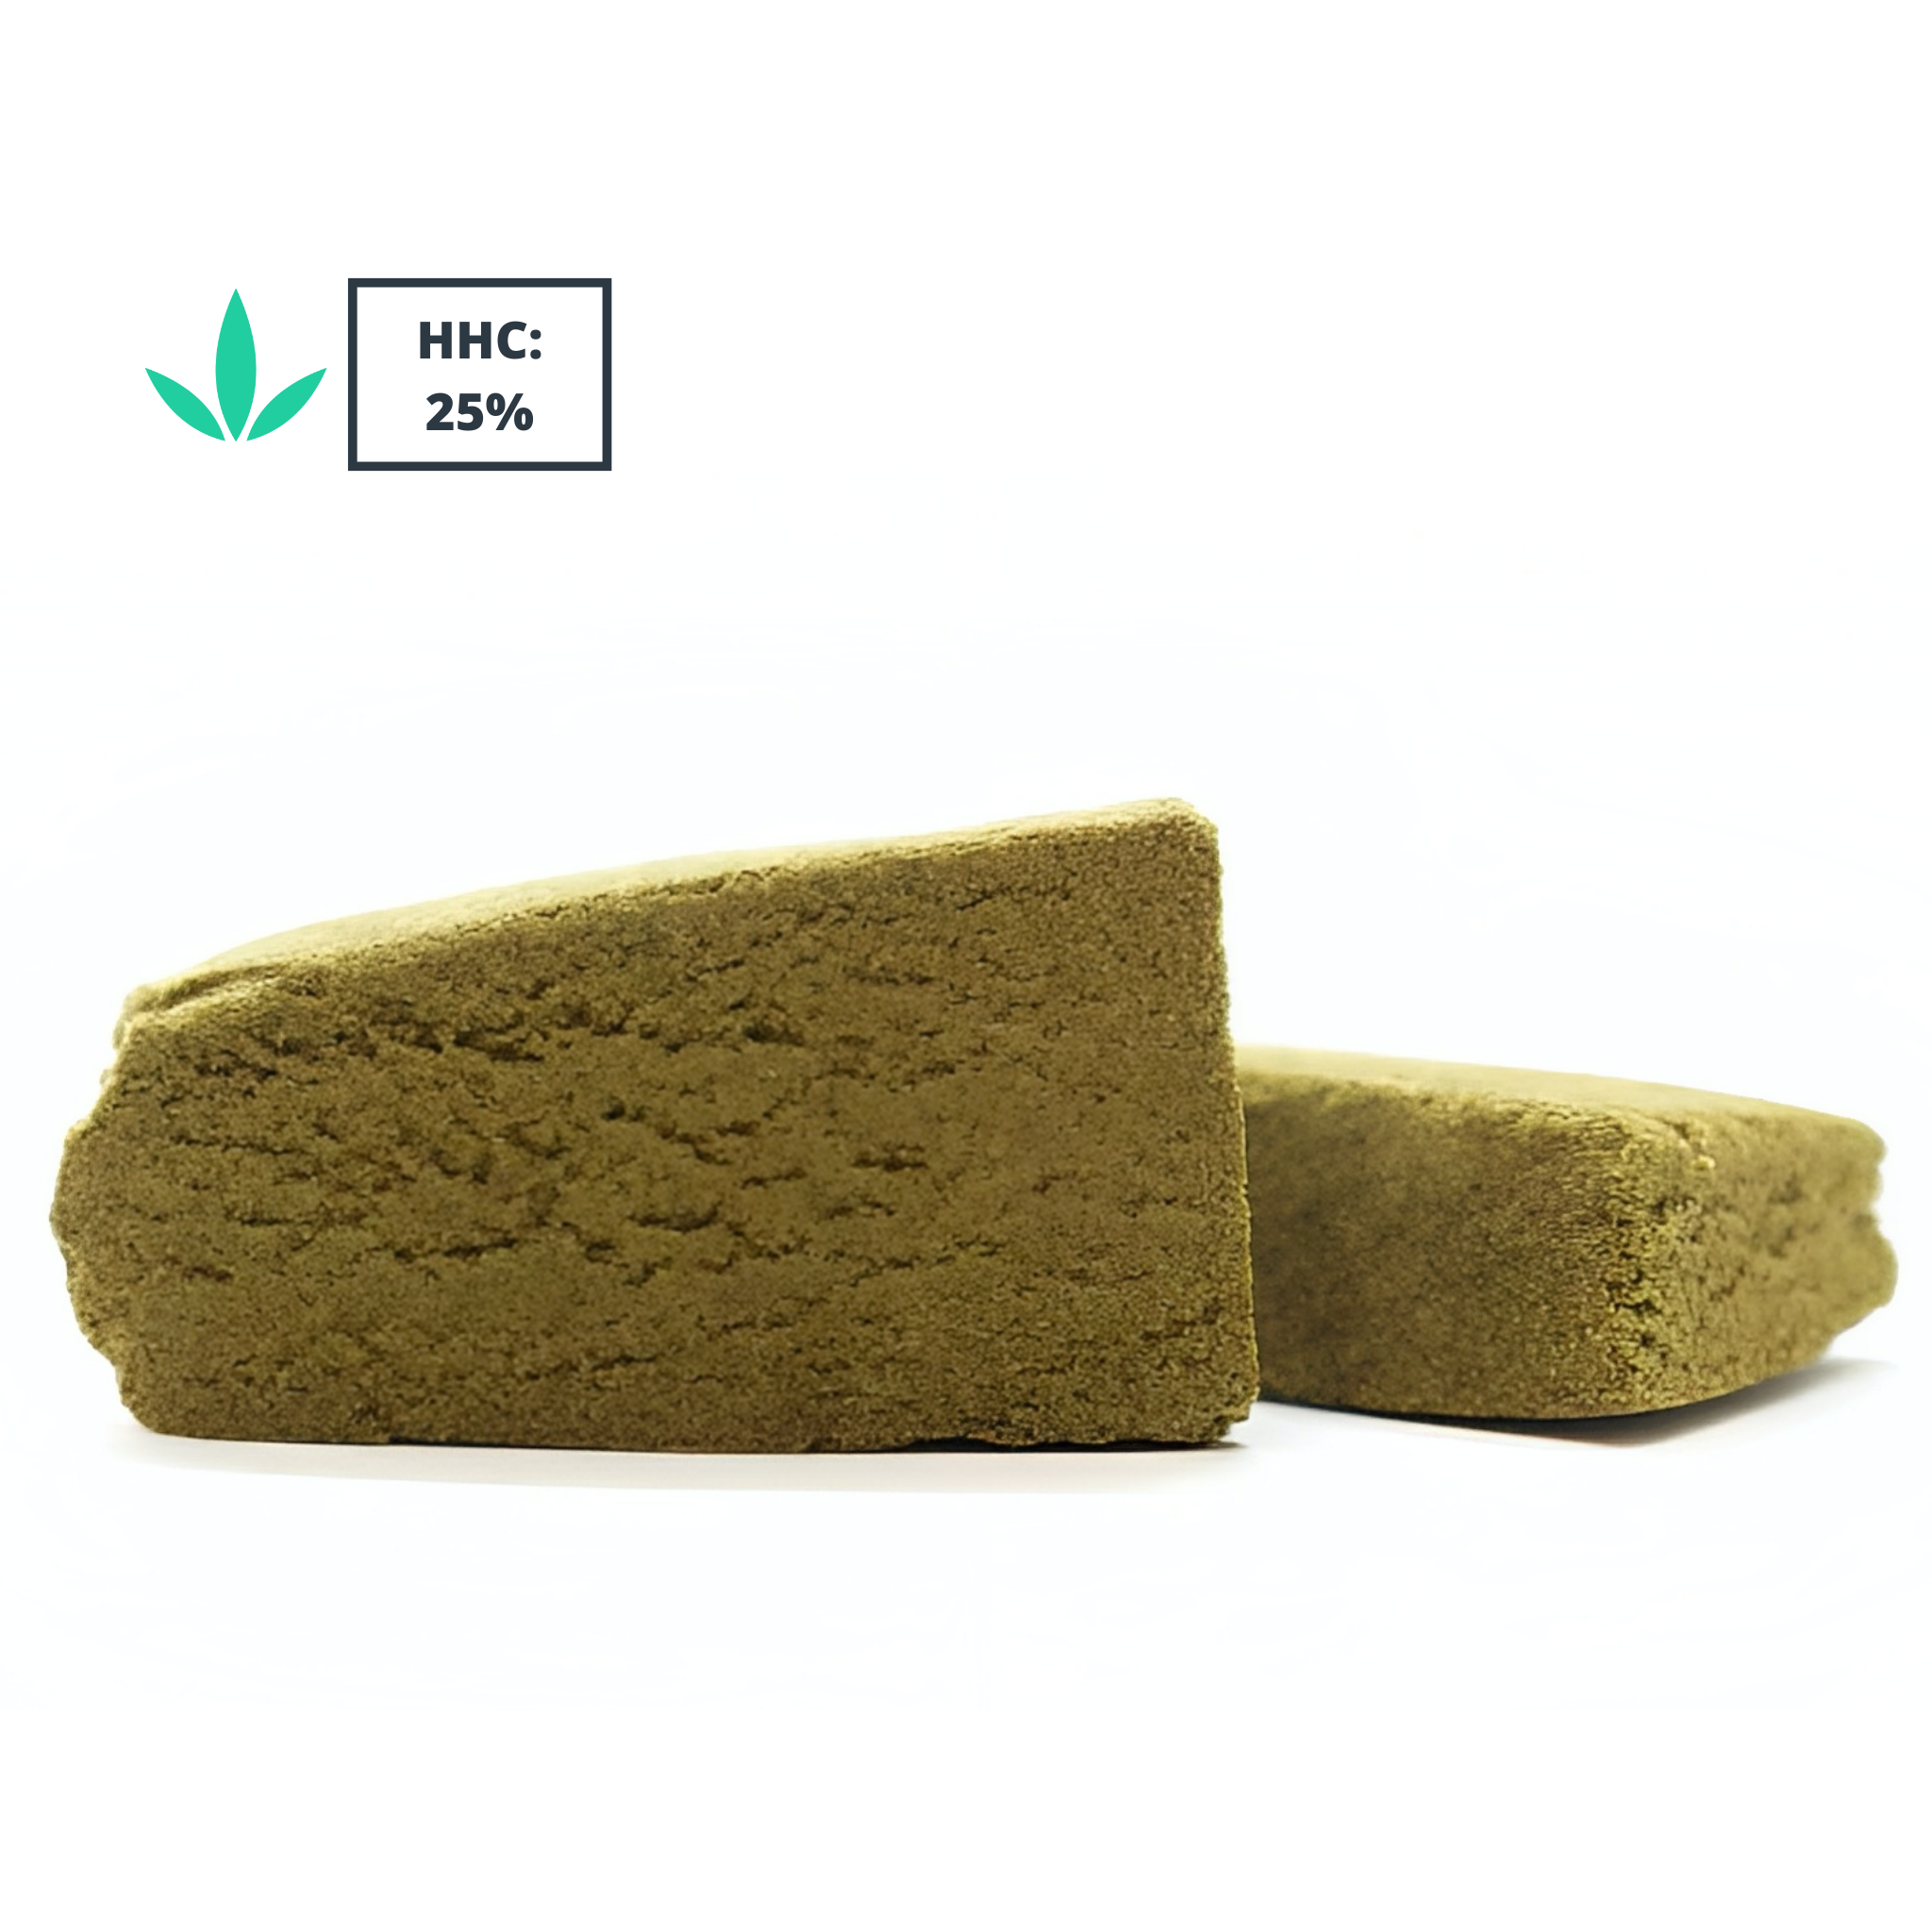 HHC Moroccan Blond Hash